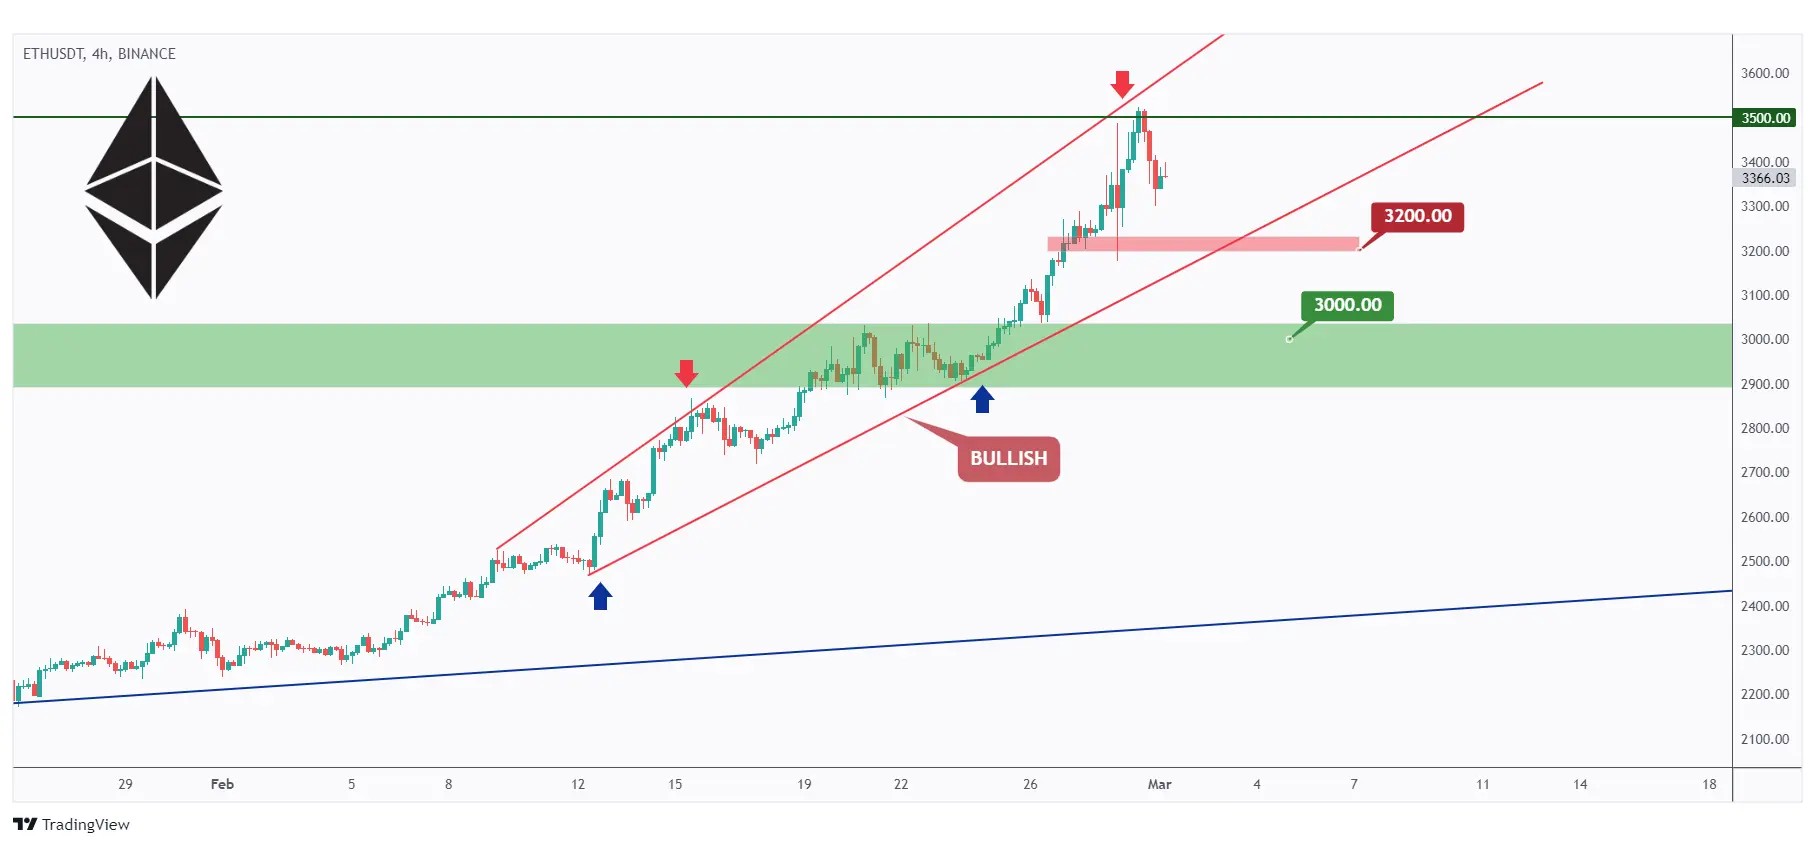 ETH 4h chart showing the overall bullish trend within the rising wedge pattern.